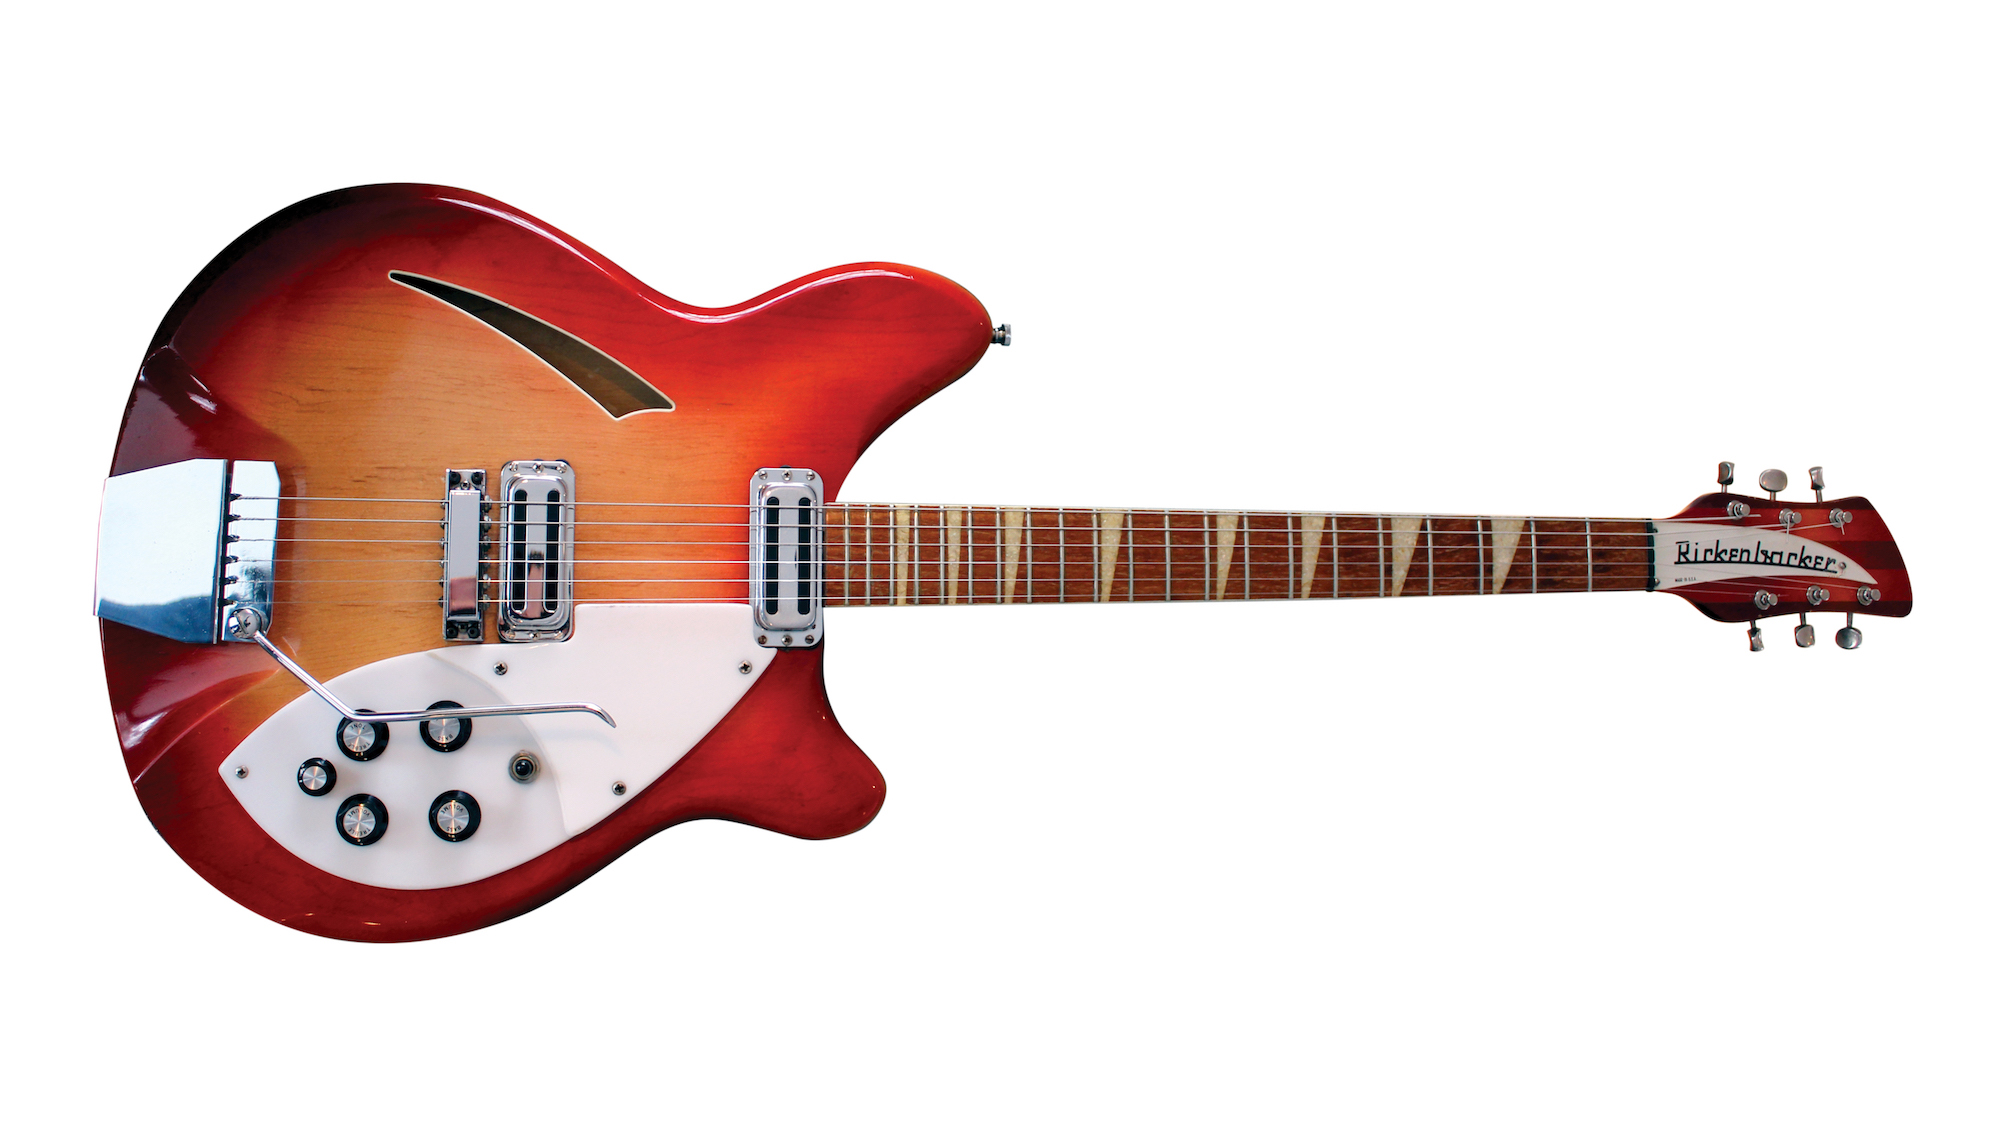 Verloren hart Inspiratie hoekpunt A Look Back at the Rickenbacker 365: One of the Storied Company's Most  Versatile and Toneful Creations | GuitarPlayer